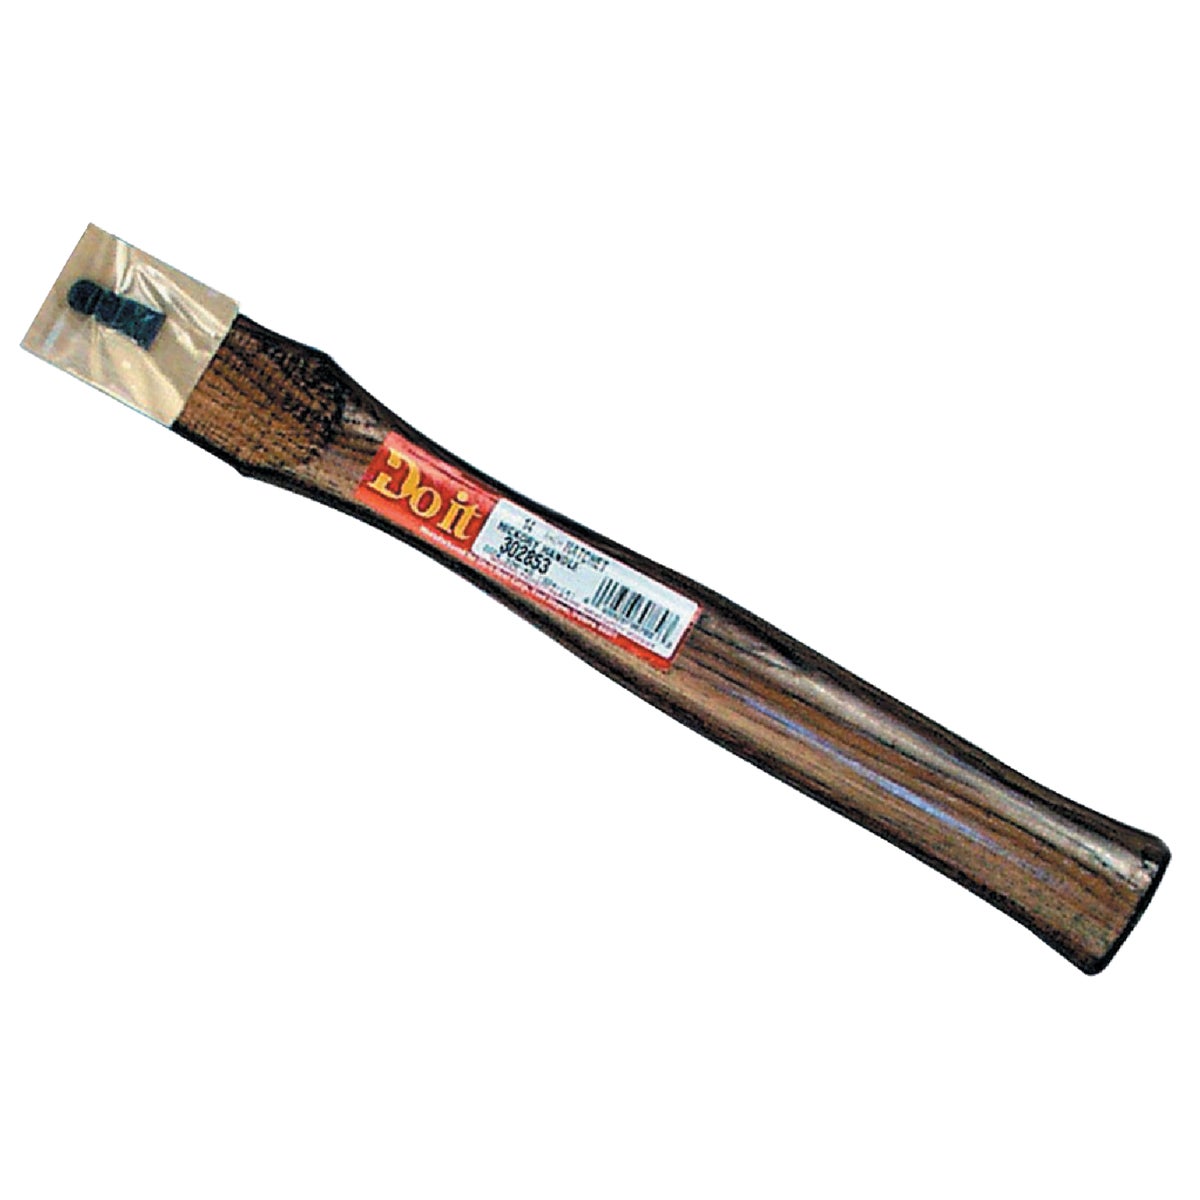 Item 302853, For use on half hatchets. Medium grade. Includes 1 wood and 1 steel wedge.